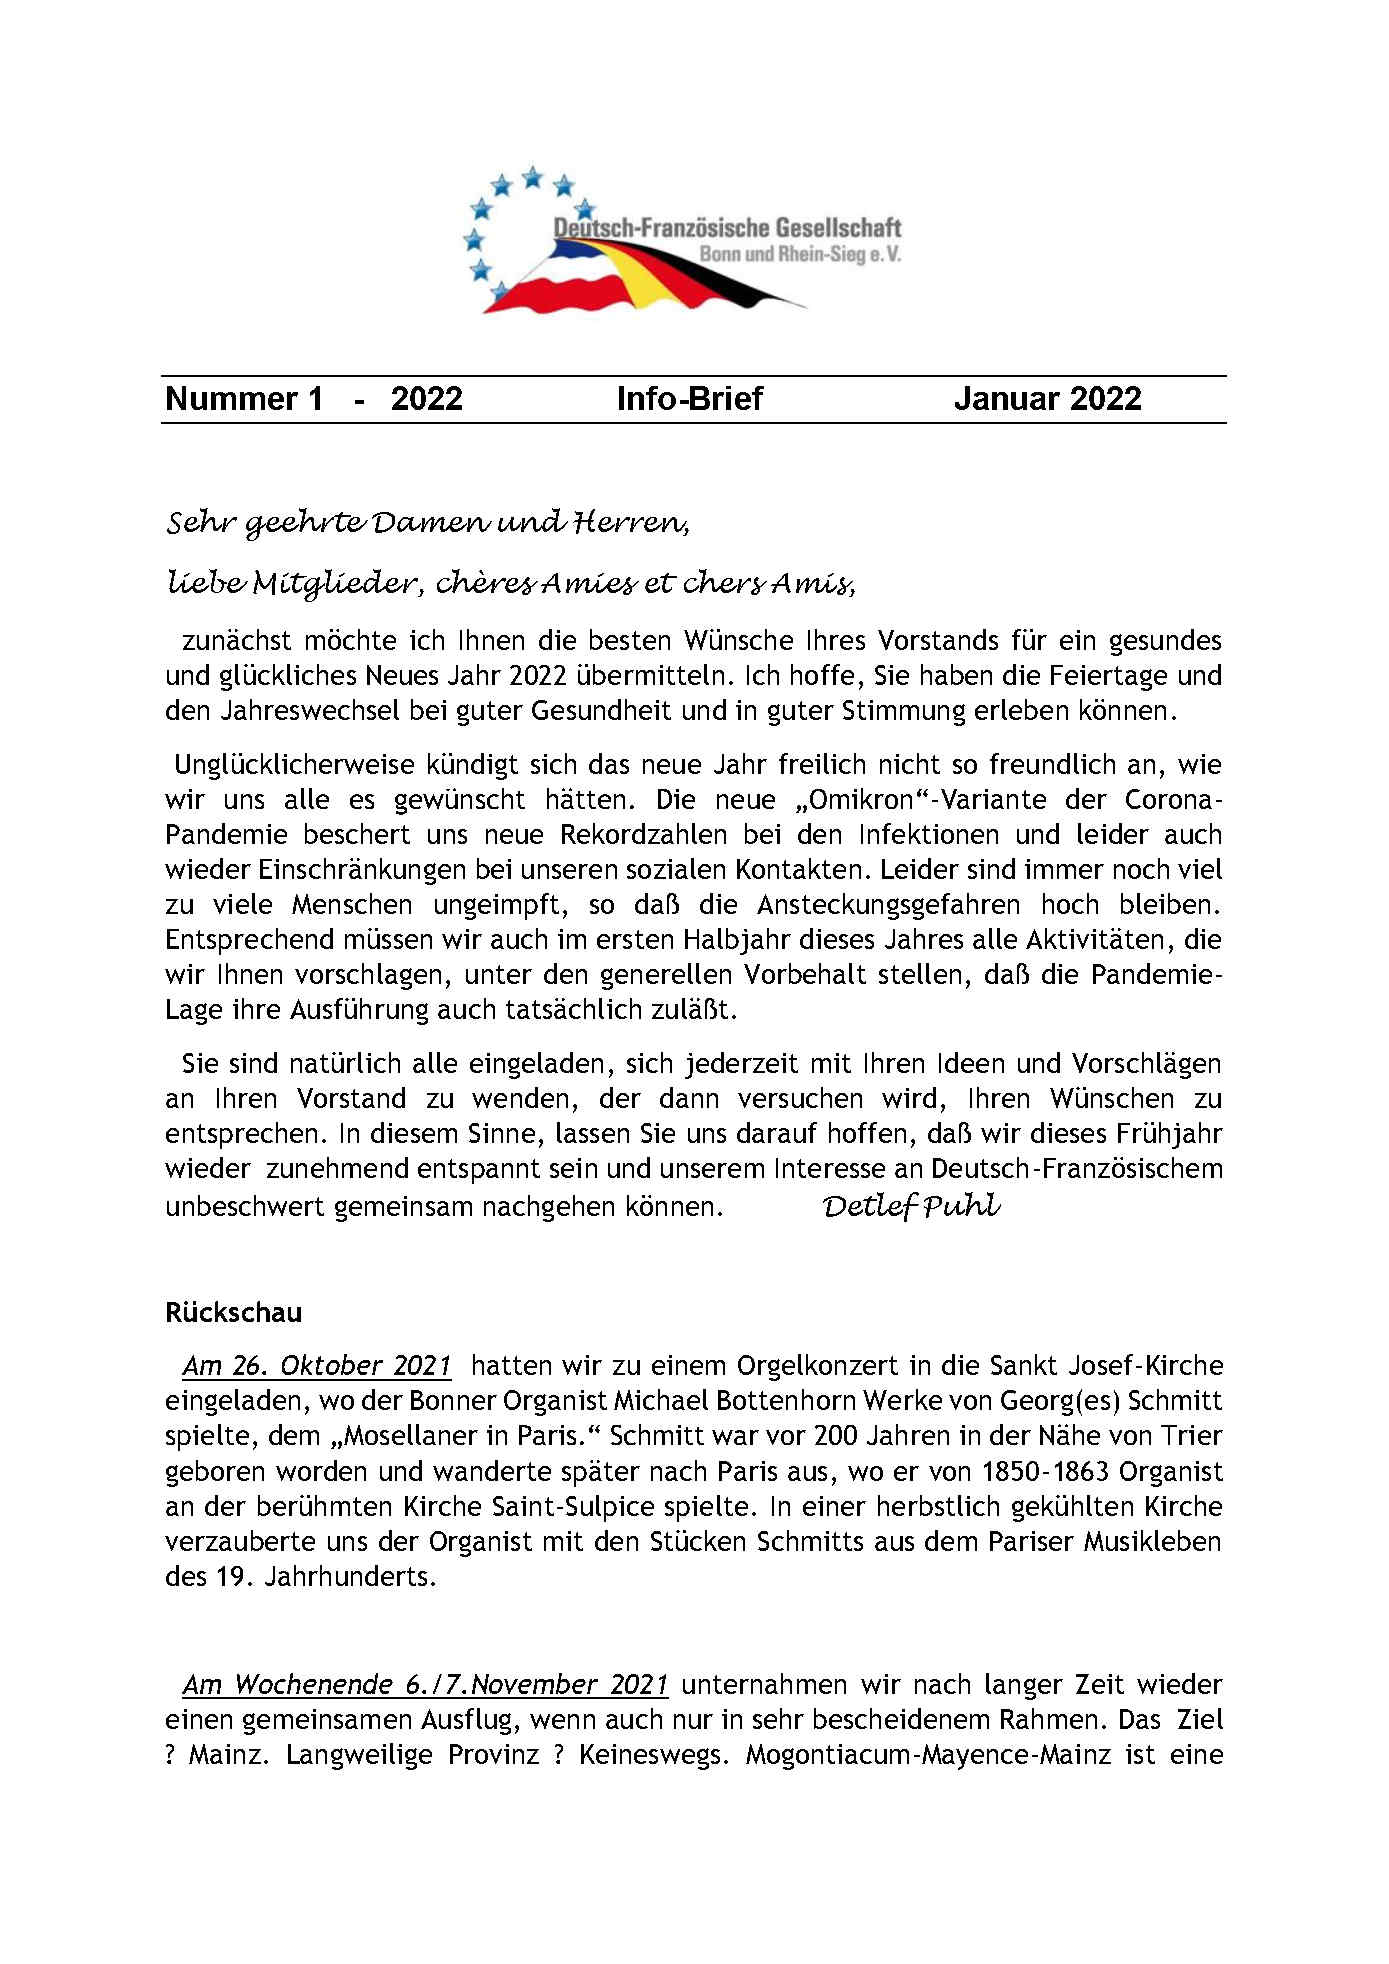 InfoBrief2022-1_Page1